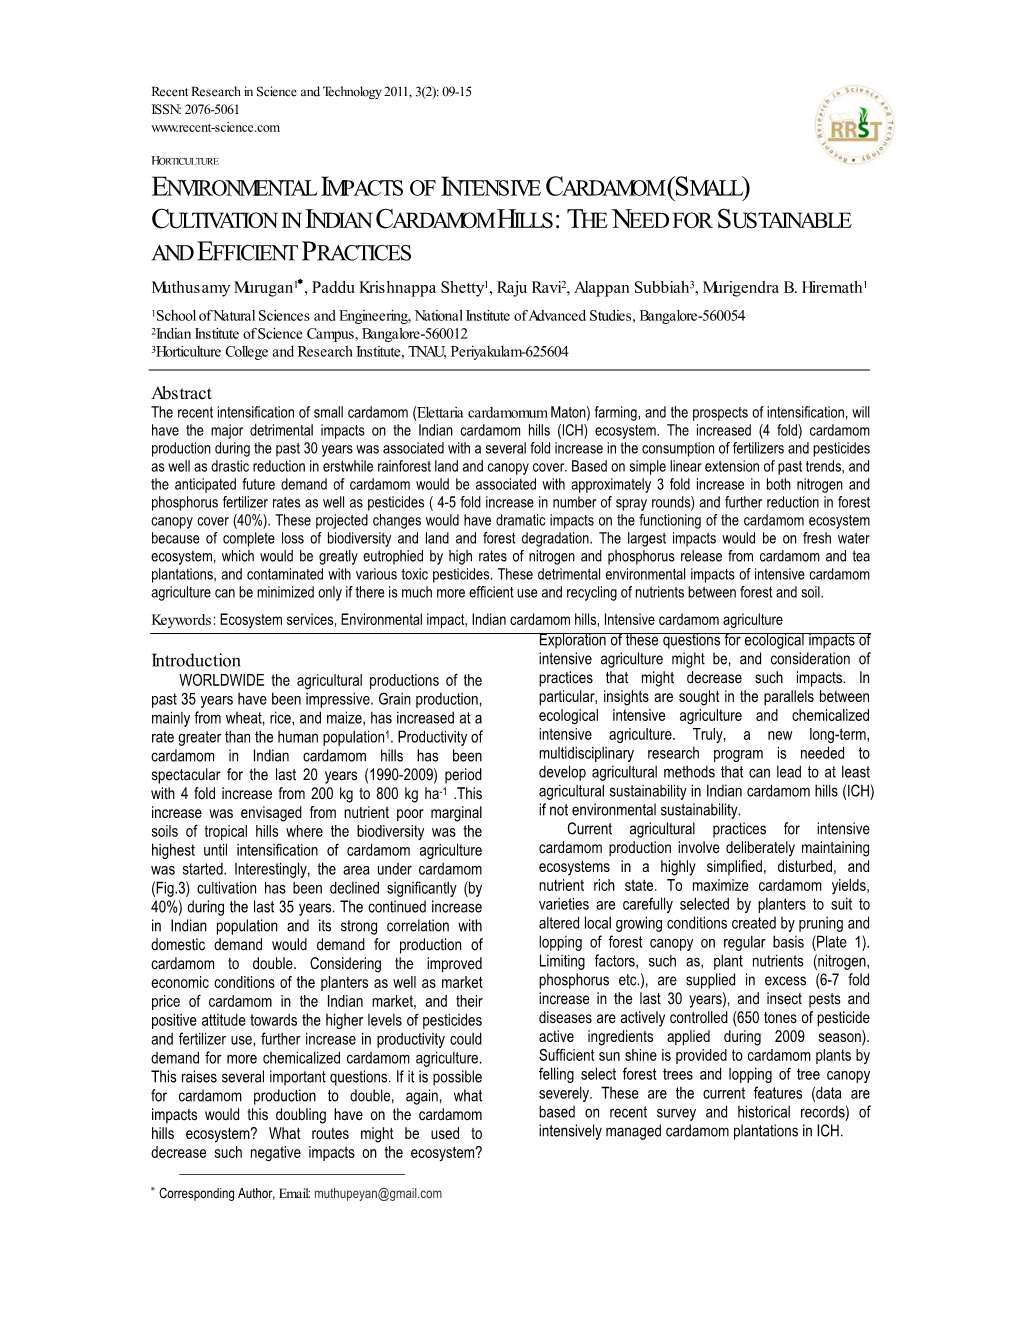 Environmental Impacts of Intensive Cardamom (Small